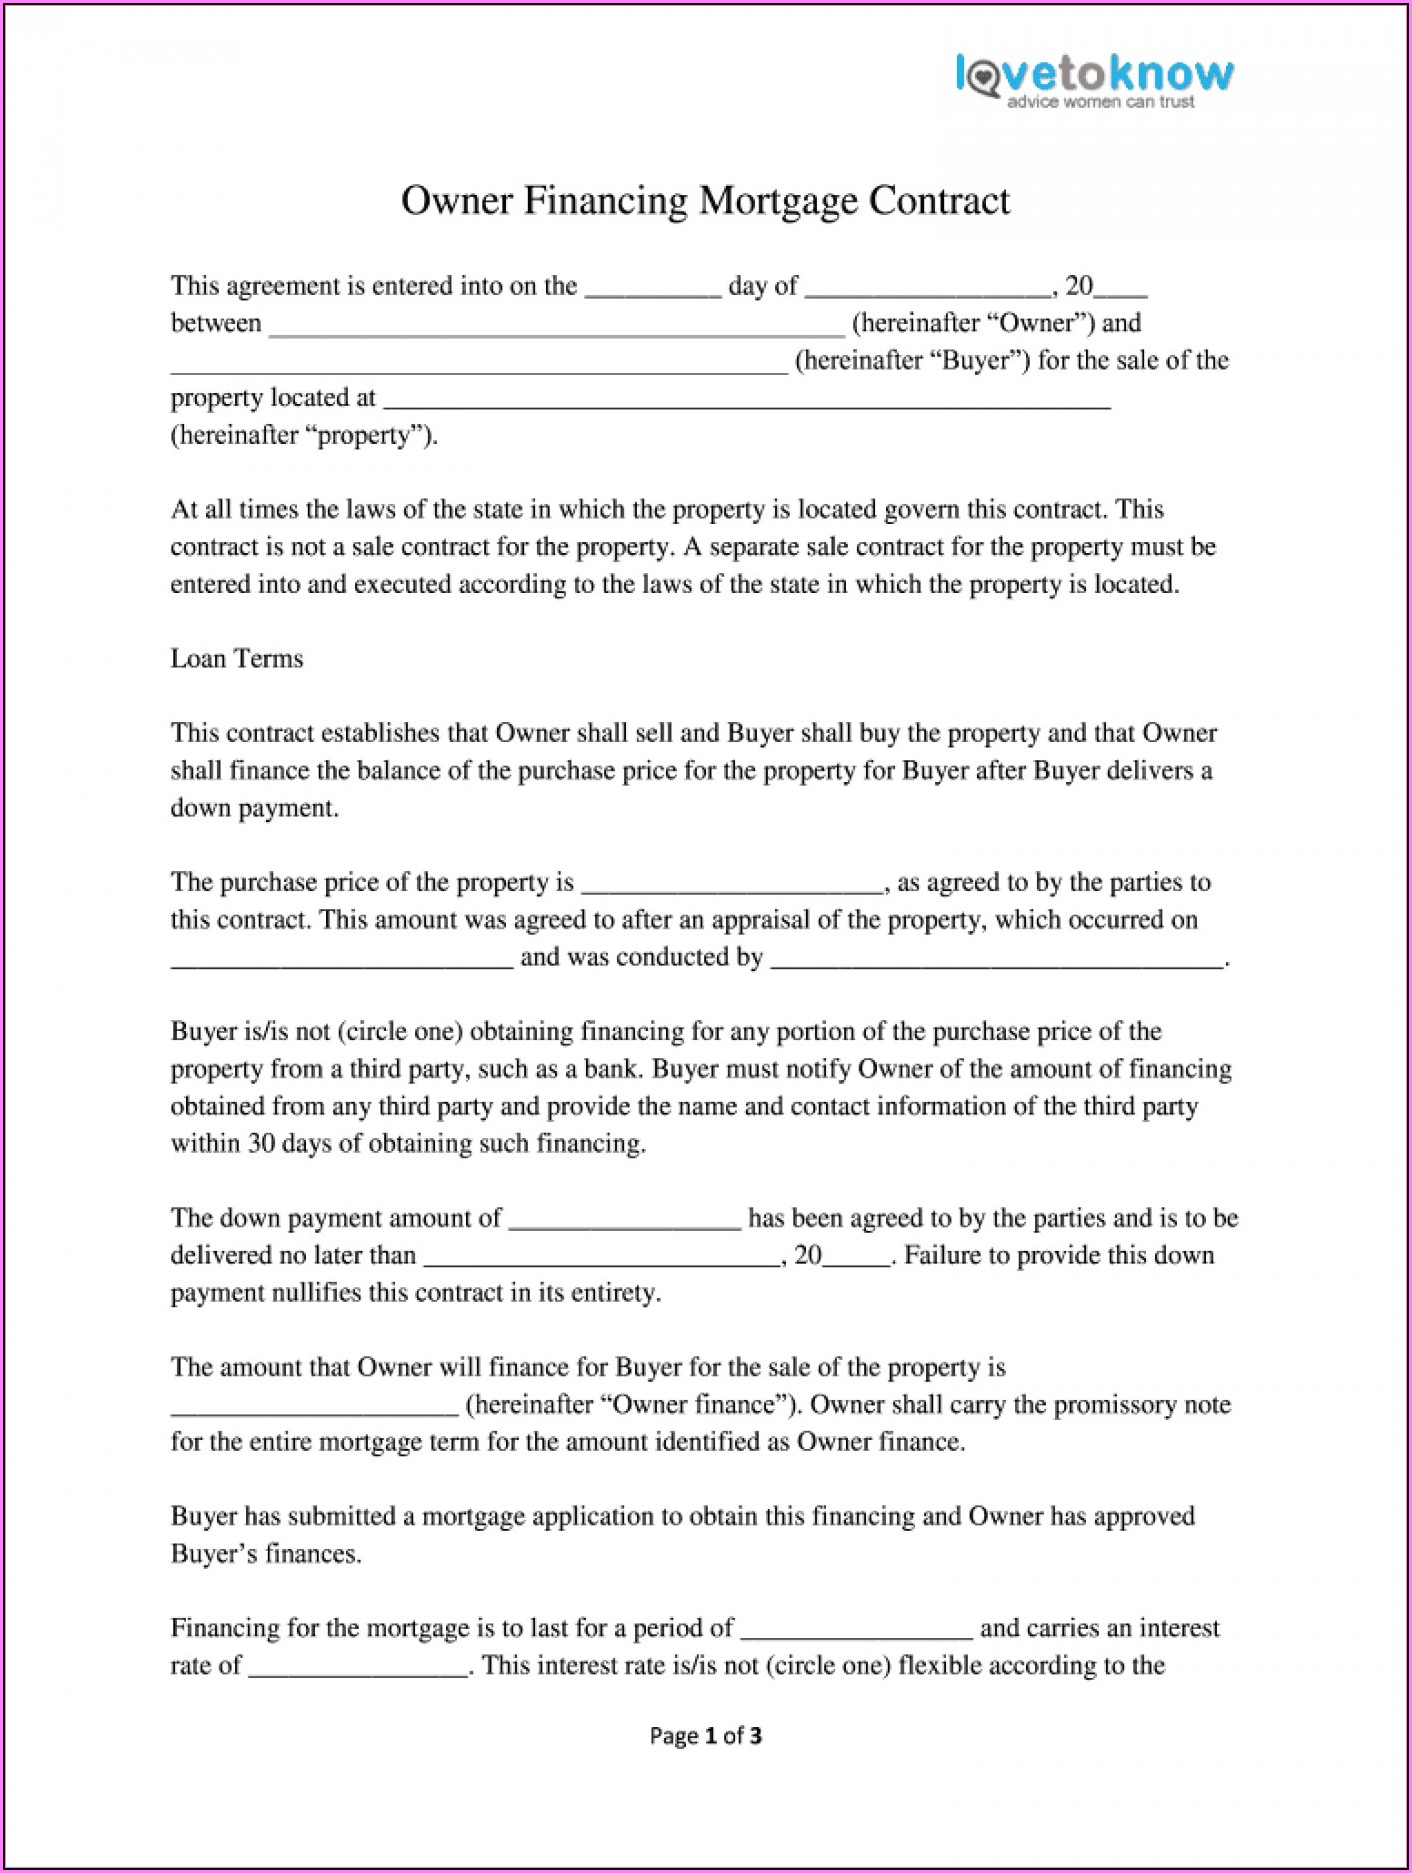 Legally Binding Contract Samples